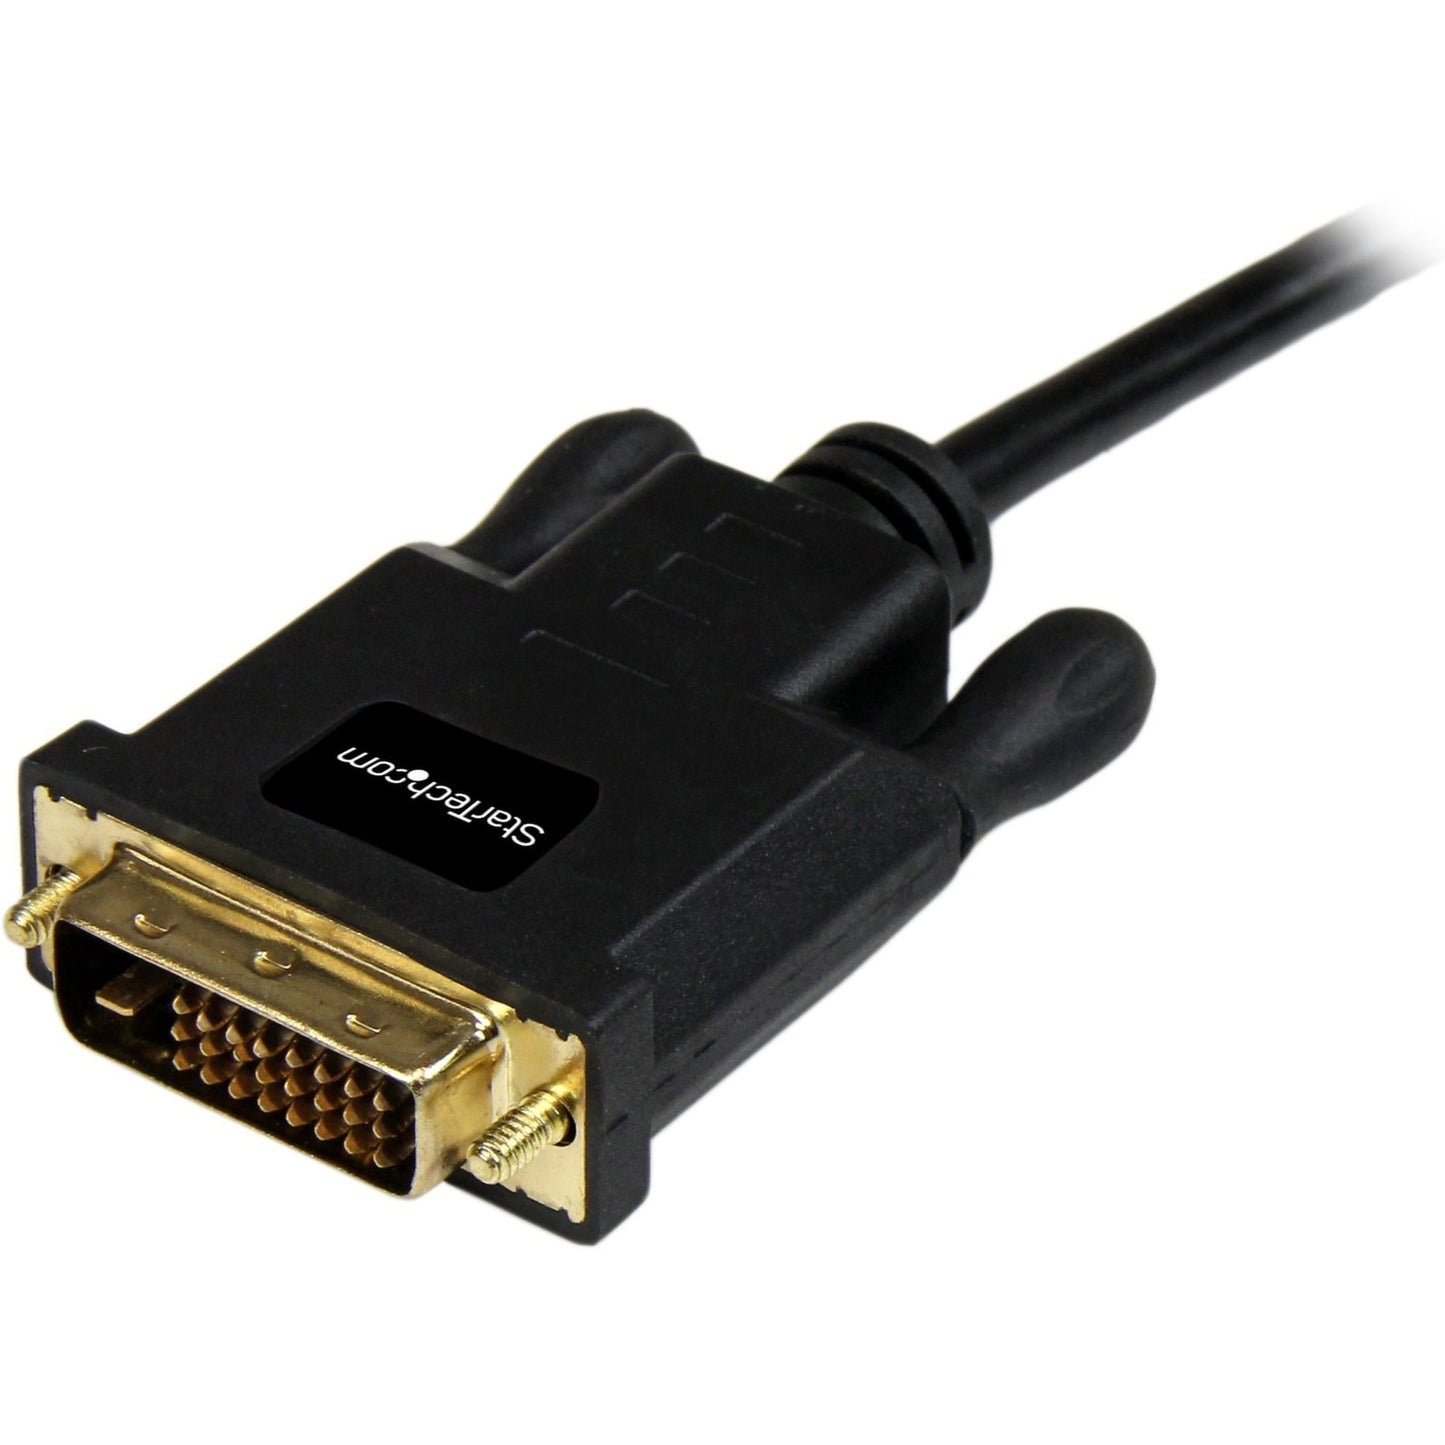 StarTech.com 10ft Mini DisplayPort to DVI Cable Mini DP to DVI-D Adapter/Converter Cable 1080p Video mDP 1.2 to DVI Monitor/Display